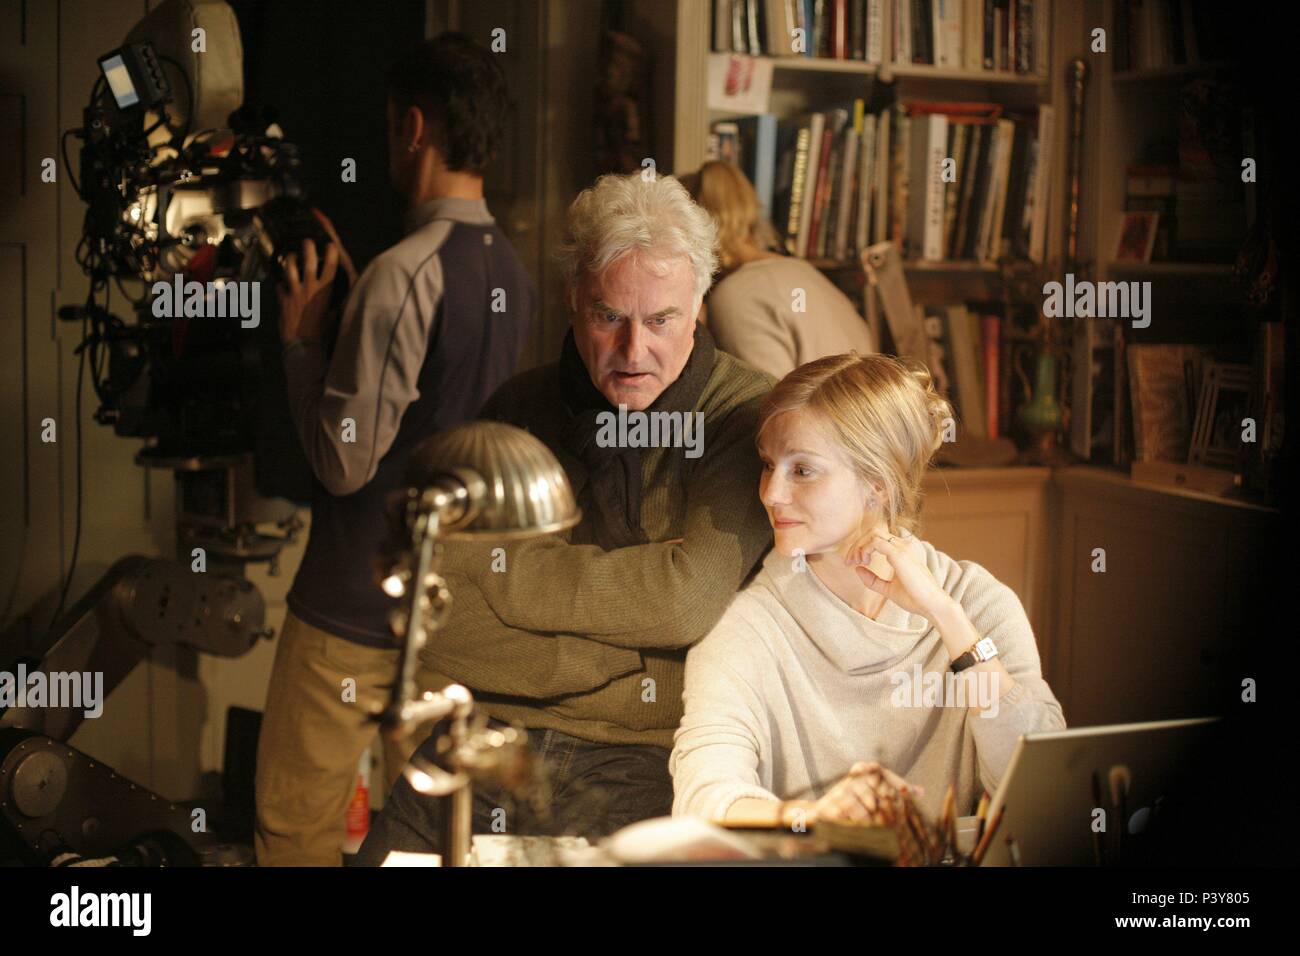 Original Film Title: THE OTHER MAN.  English Title: THE OTHER MAN.  Film Director: RICHARD EYRE.  Year: 2008.  Stars: LAURA LINNEY; RICHARD EYRE. Credit: RAINMARK FILMS / Album Stock Photo